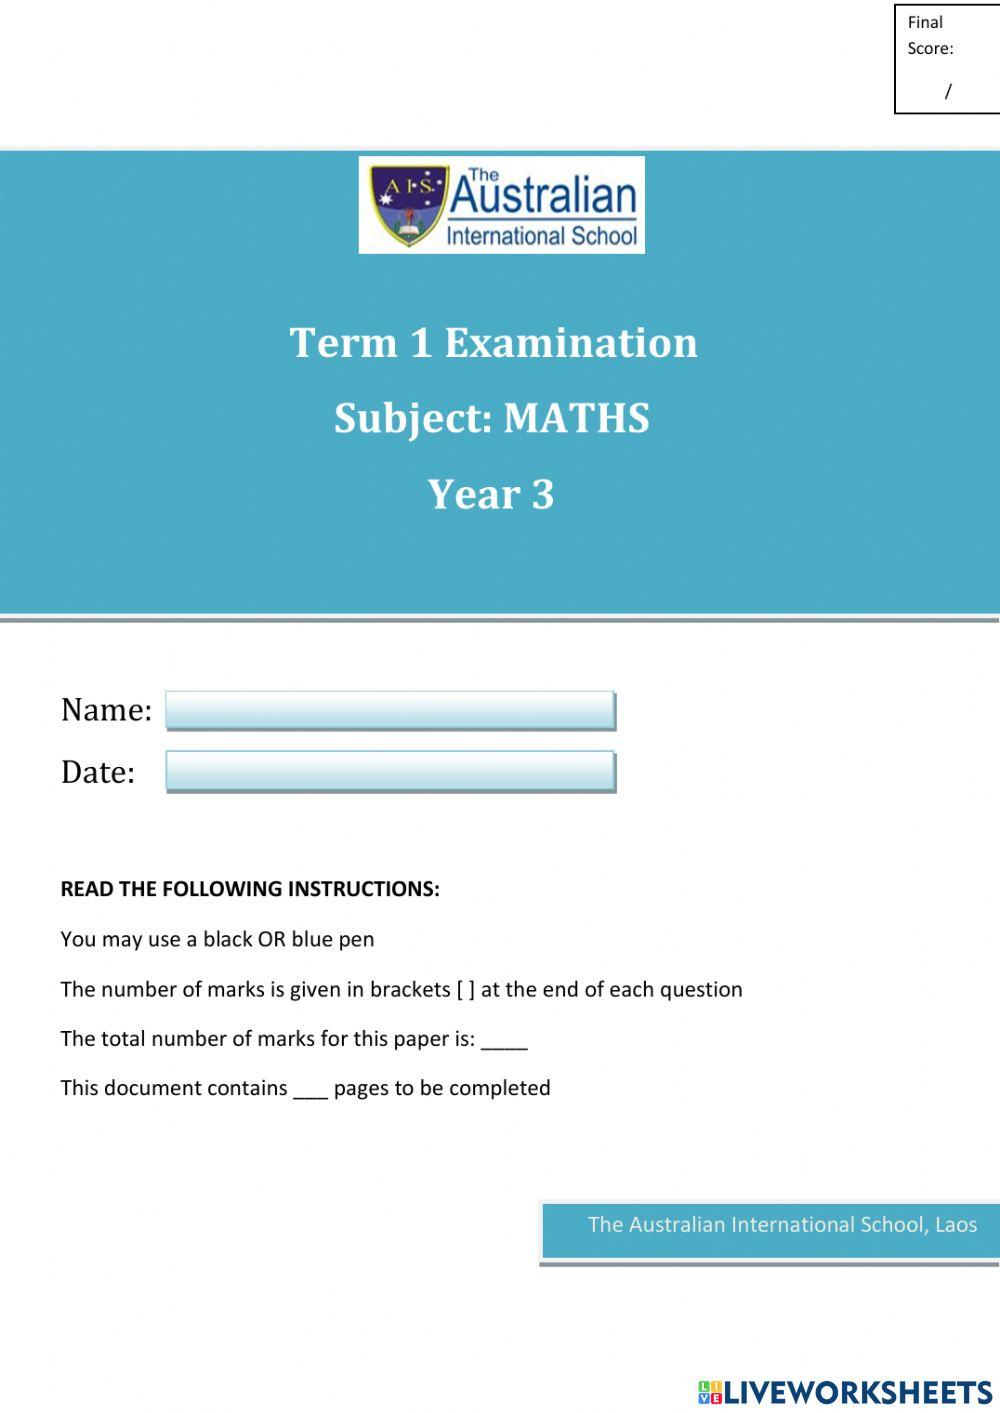 First Term Examination in Maths (Year 3)